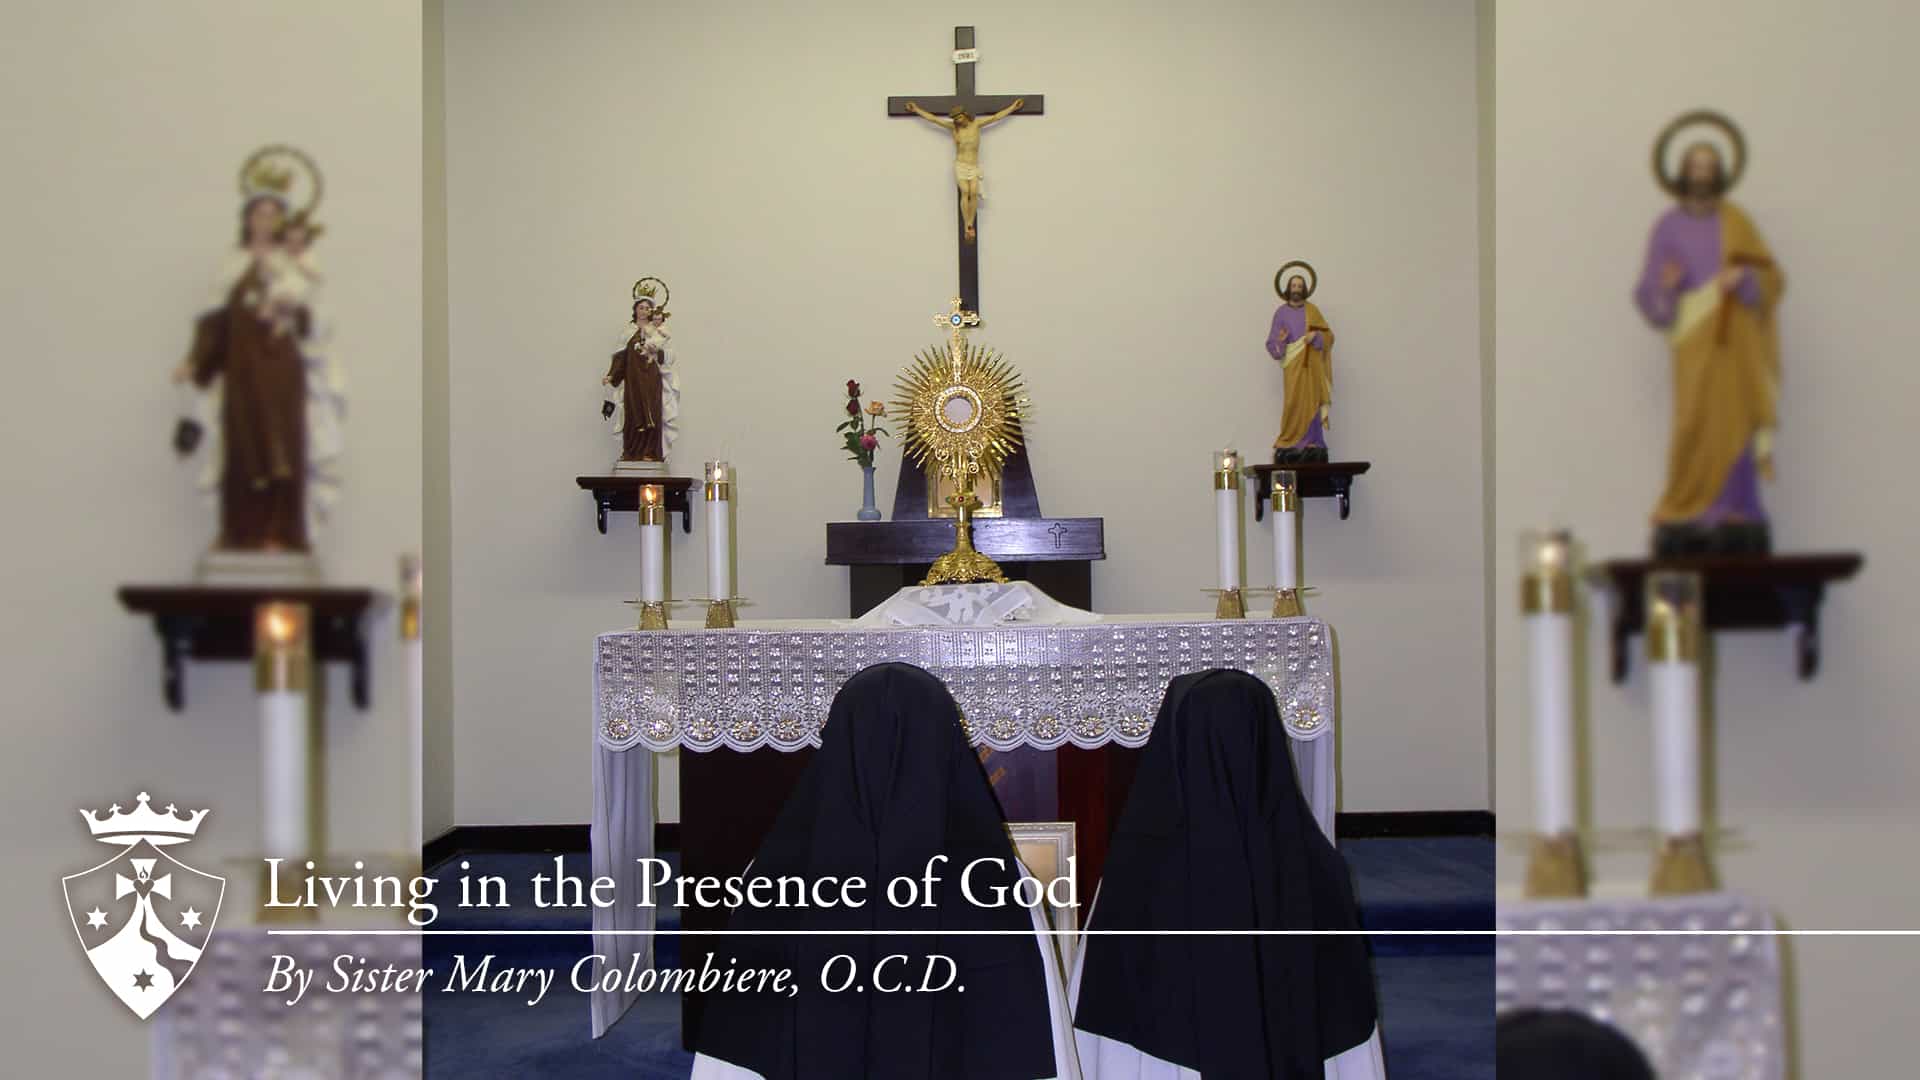 Sisters praying in adoration chapel, 'Living in the Presence of God, By Sister Mary Colombiere, O.C.D.'